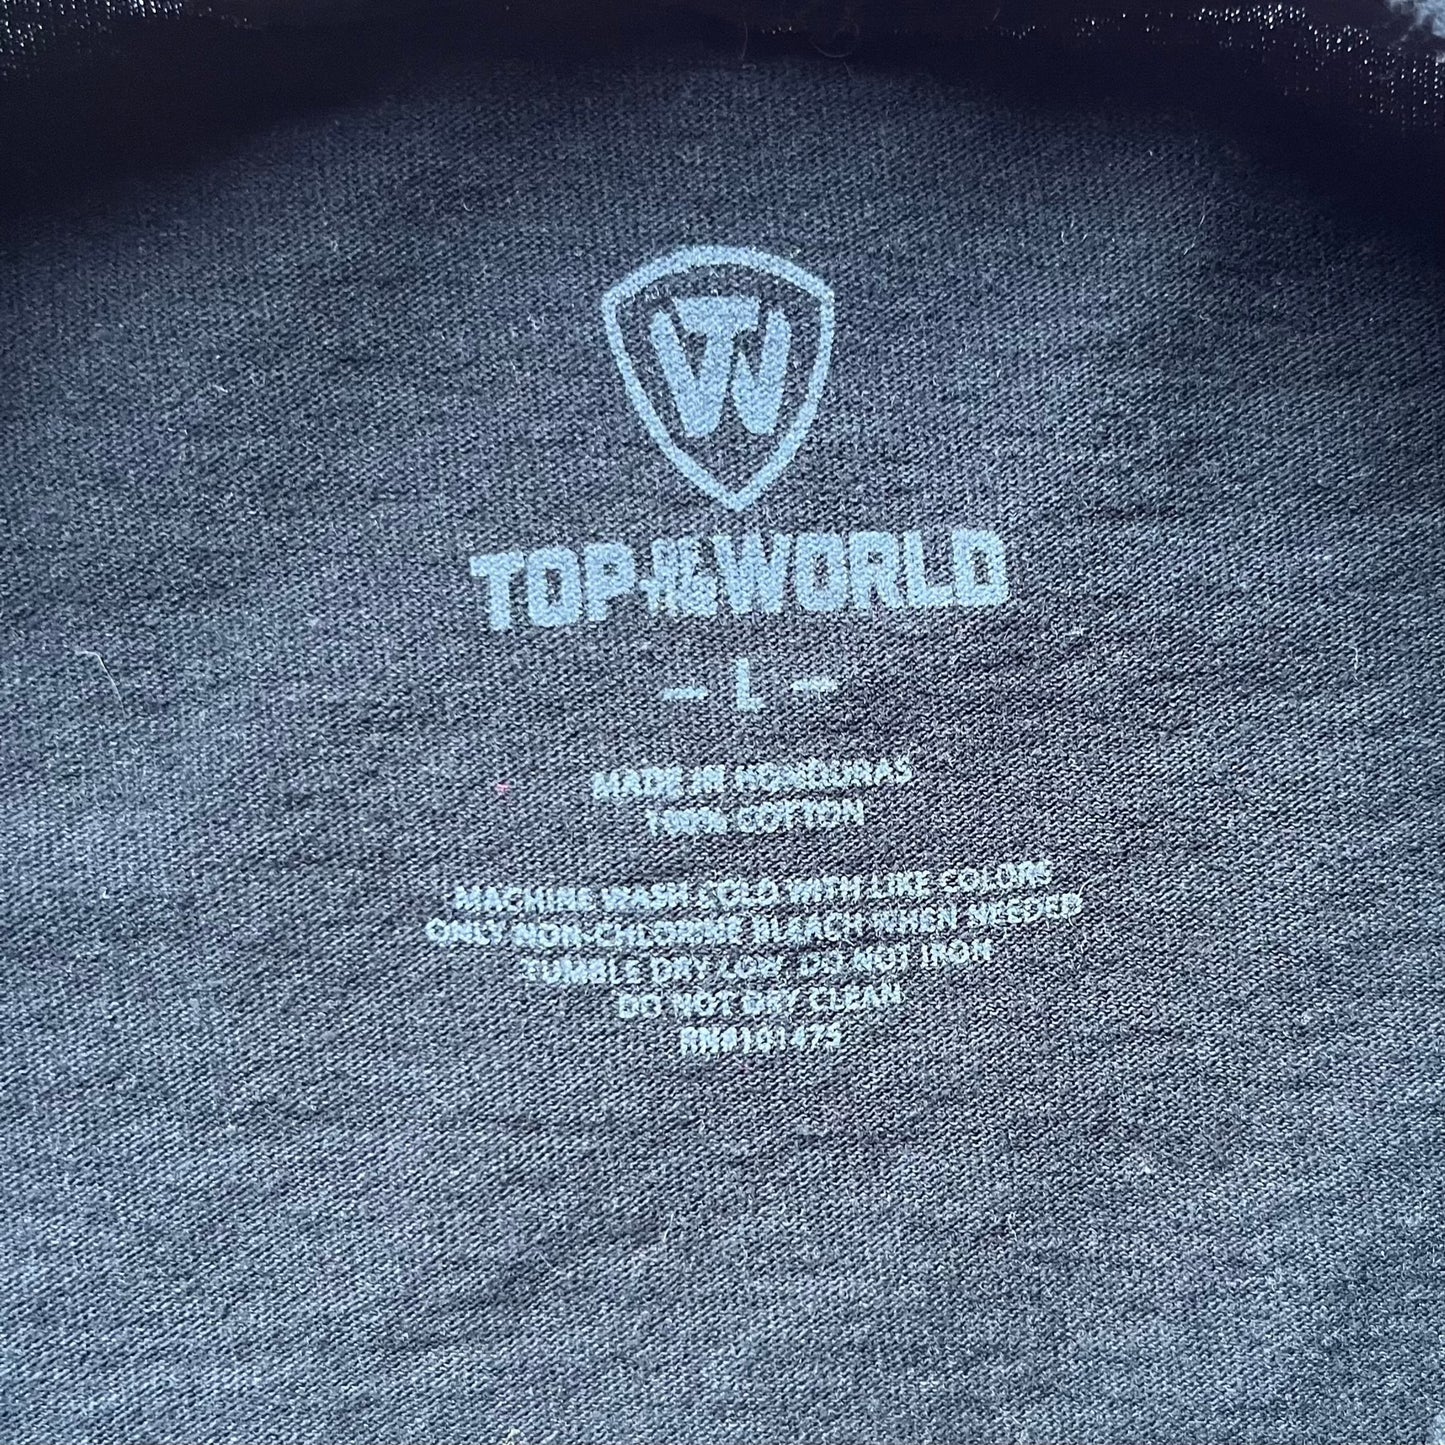 Ohio State University - Top of the World Tee (Large)